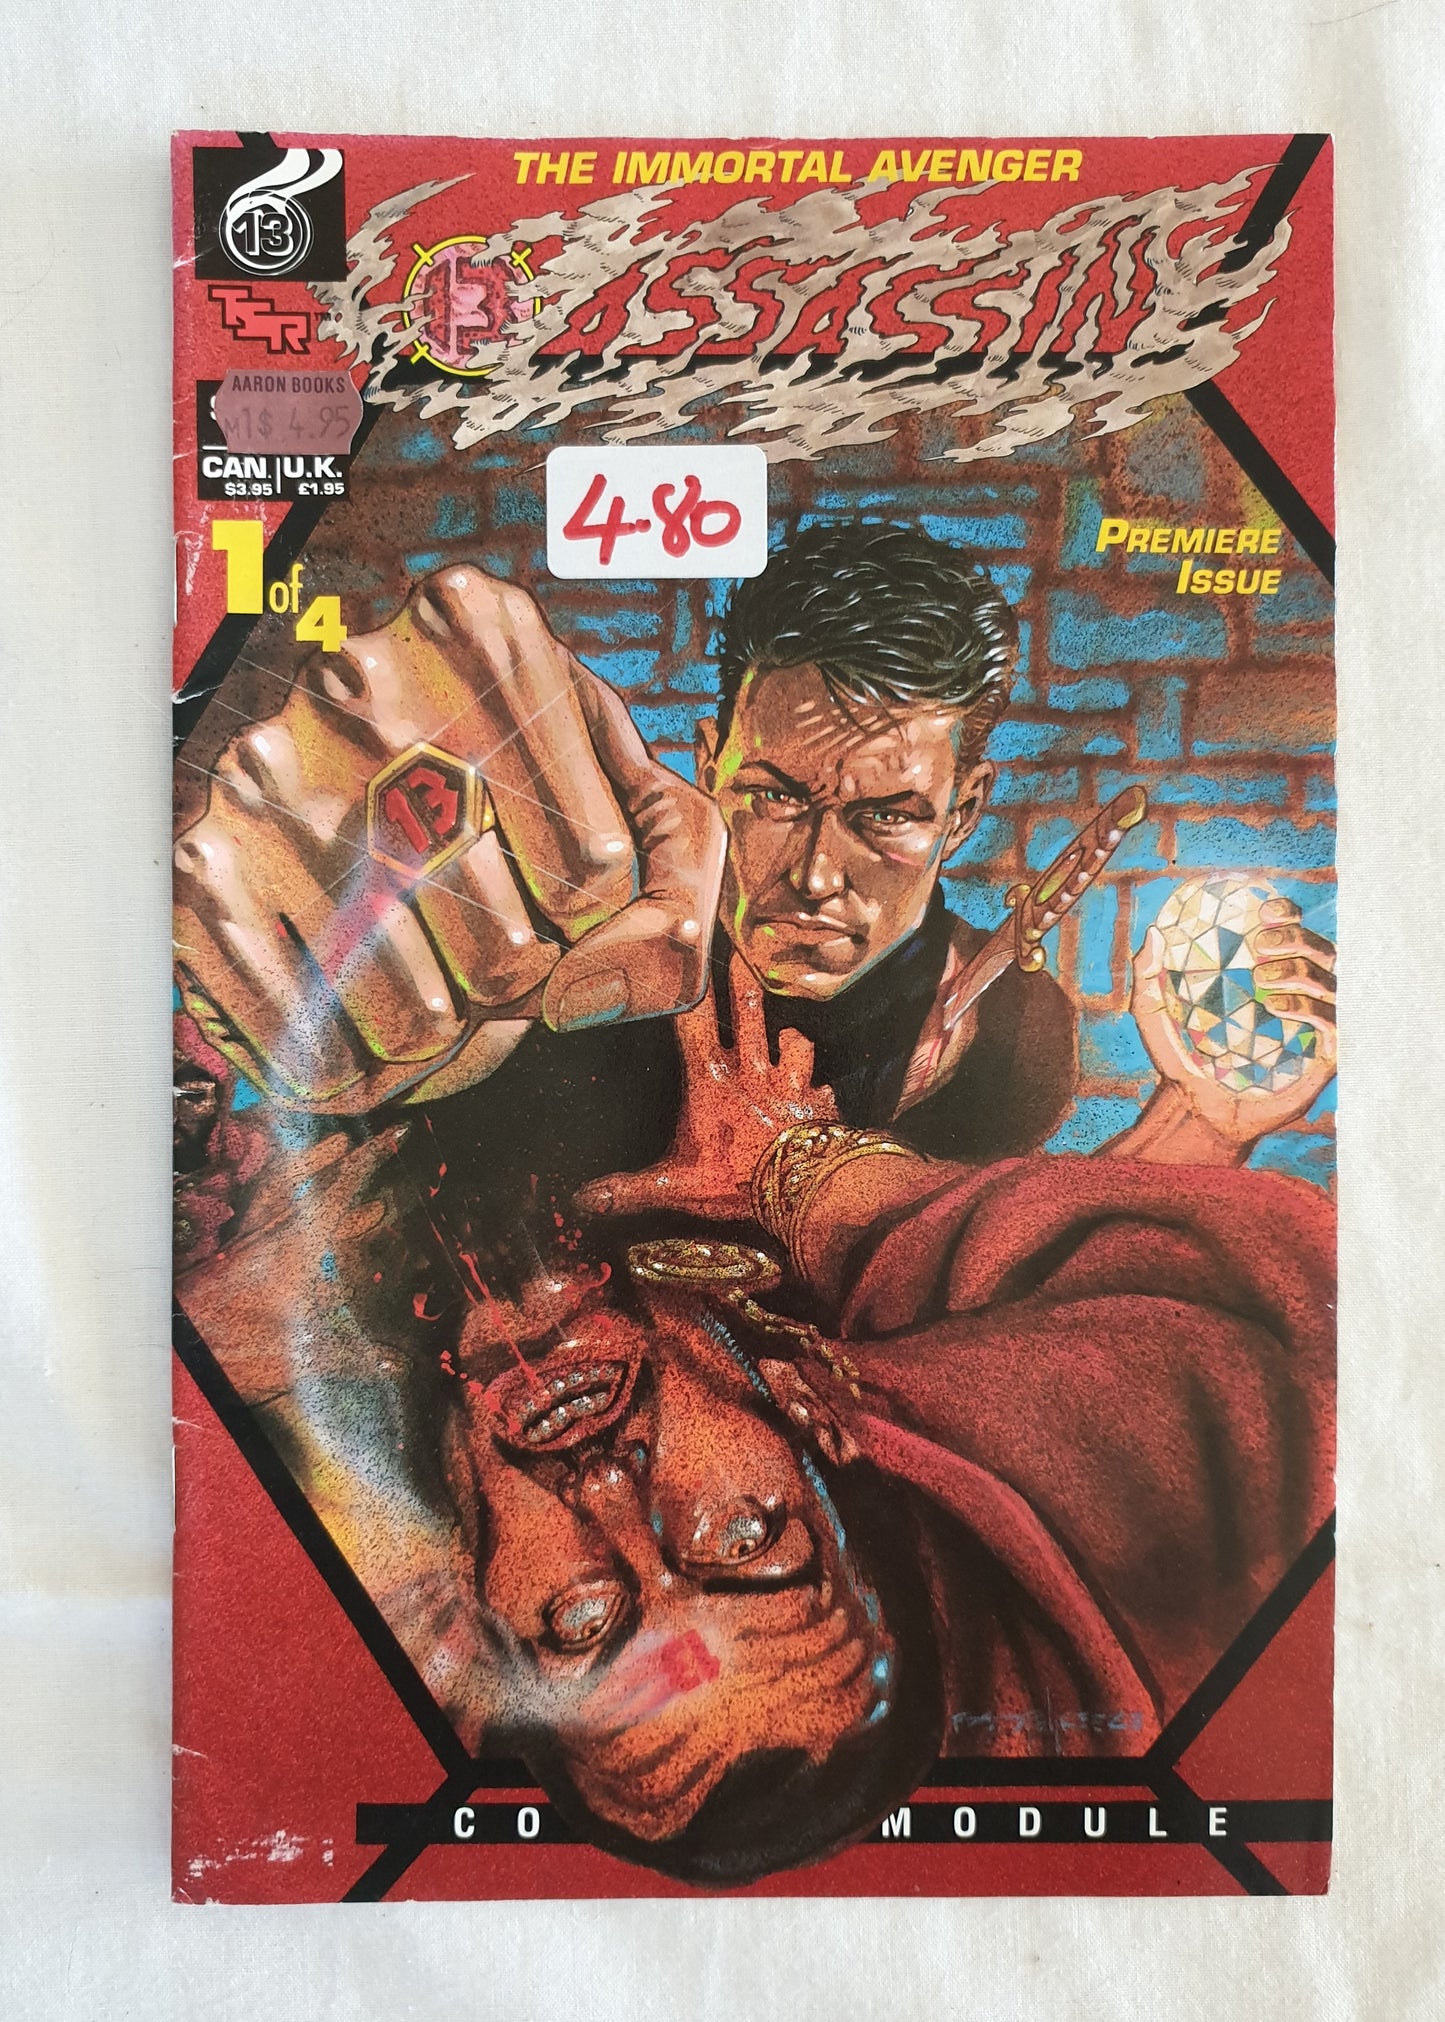 The Immortal Avenger Assassin (1 of 4) by Barr, Phipps and Alcala